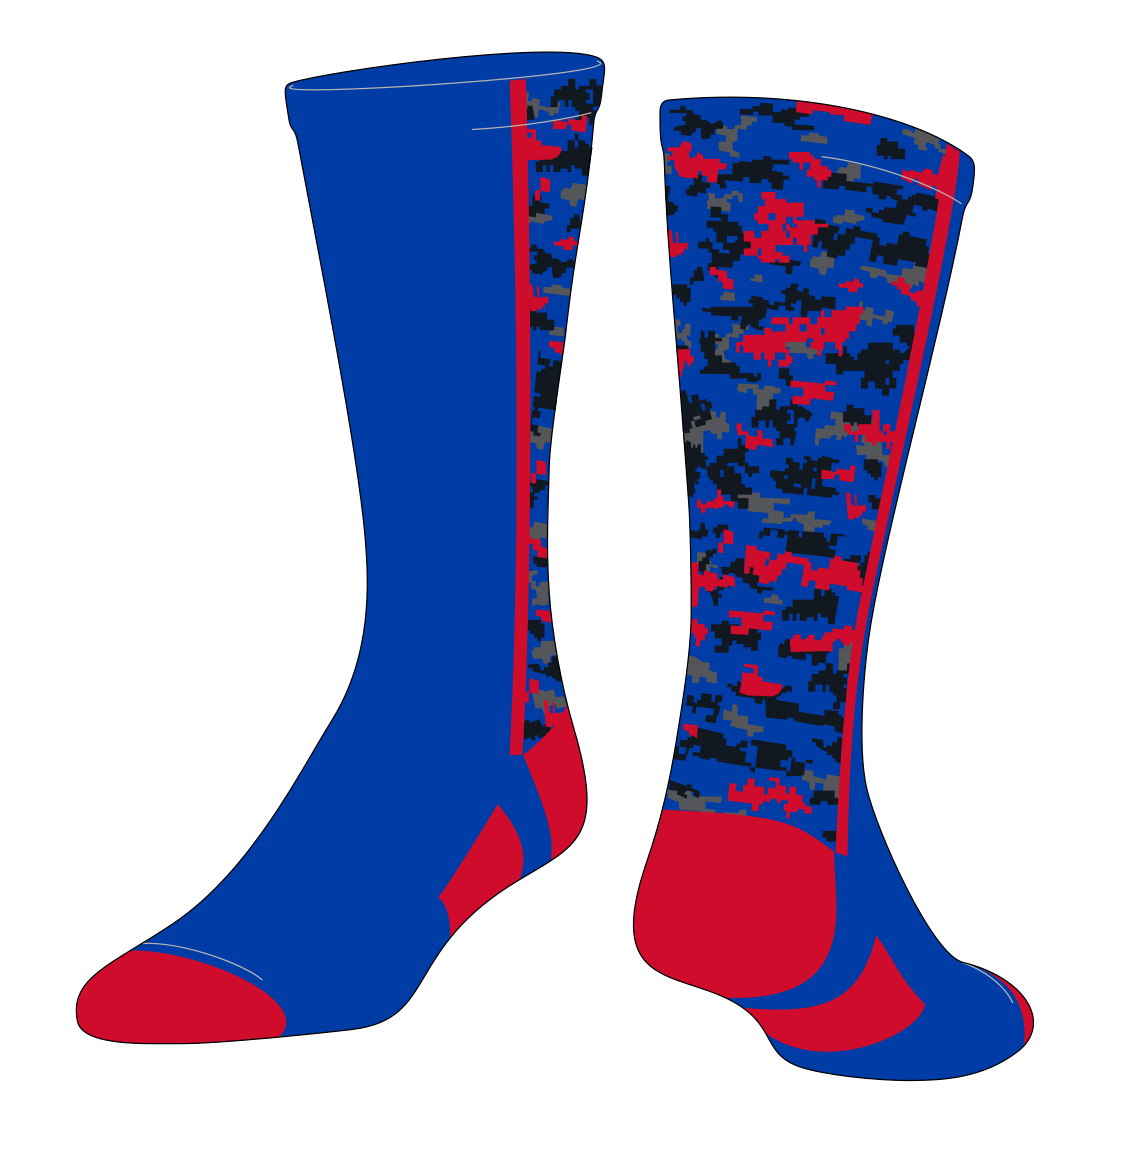 Sock clipart blue boot, Sock blue boot Transparent FREE for download on ...